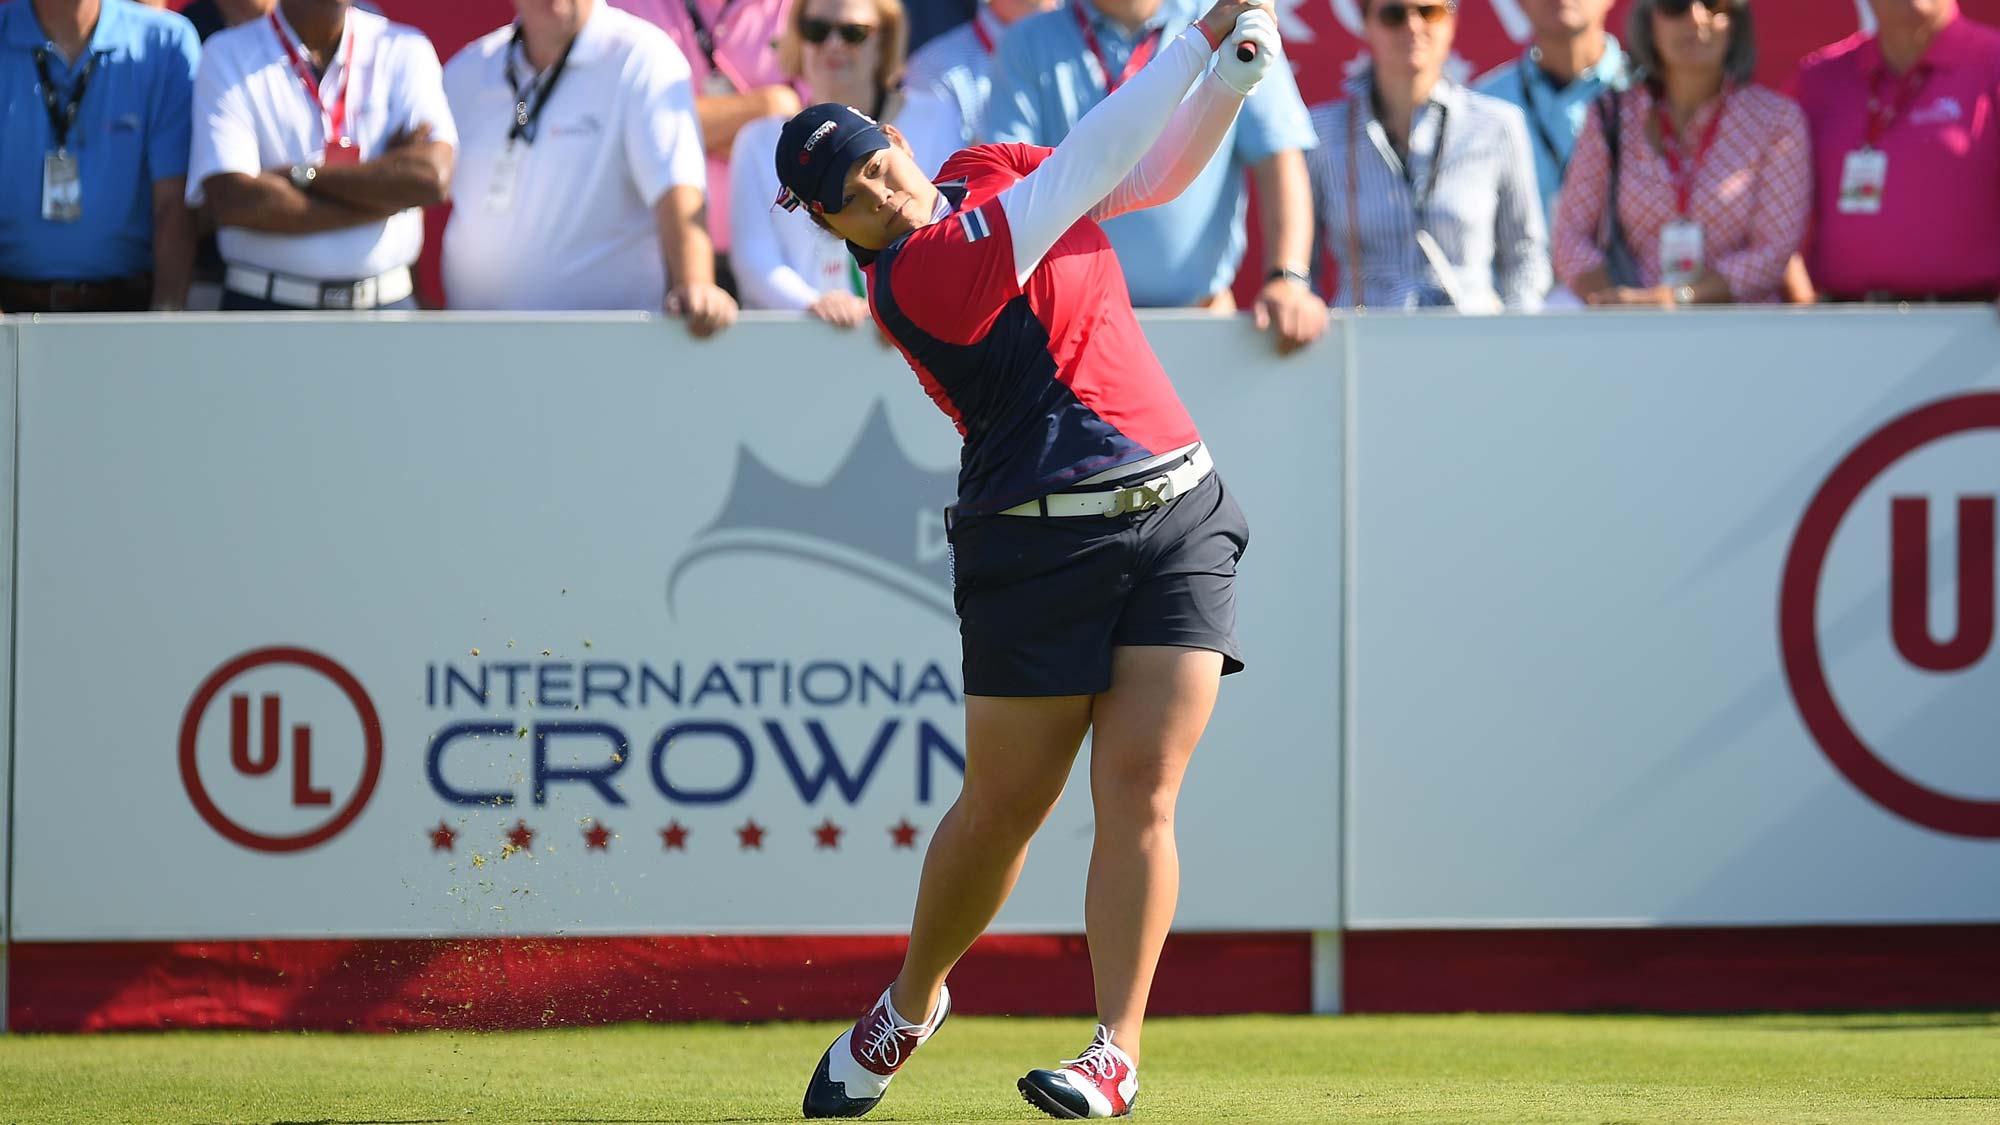 Ariya Jutanugarn of Thailand hits a tee shot on the first tee in the Pool B match between Japan and Thailand on day one of the UL International Crown